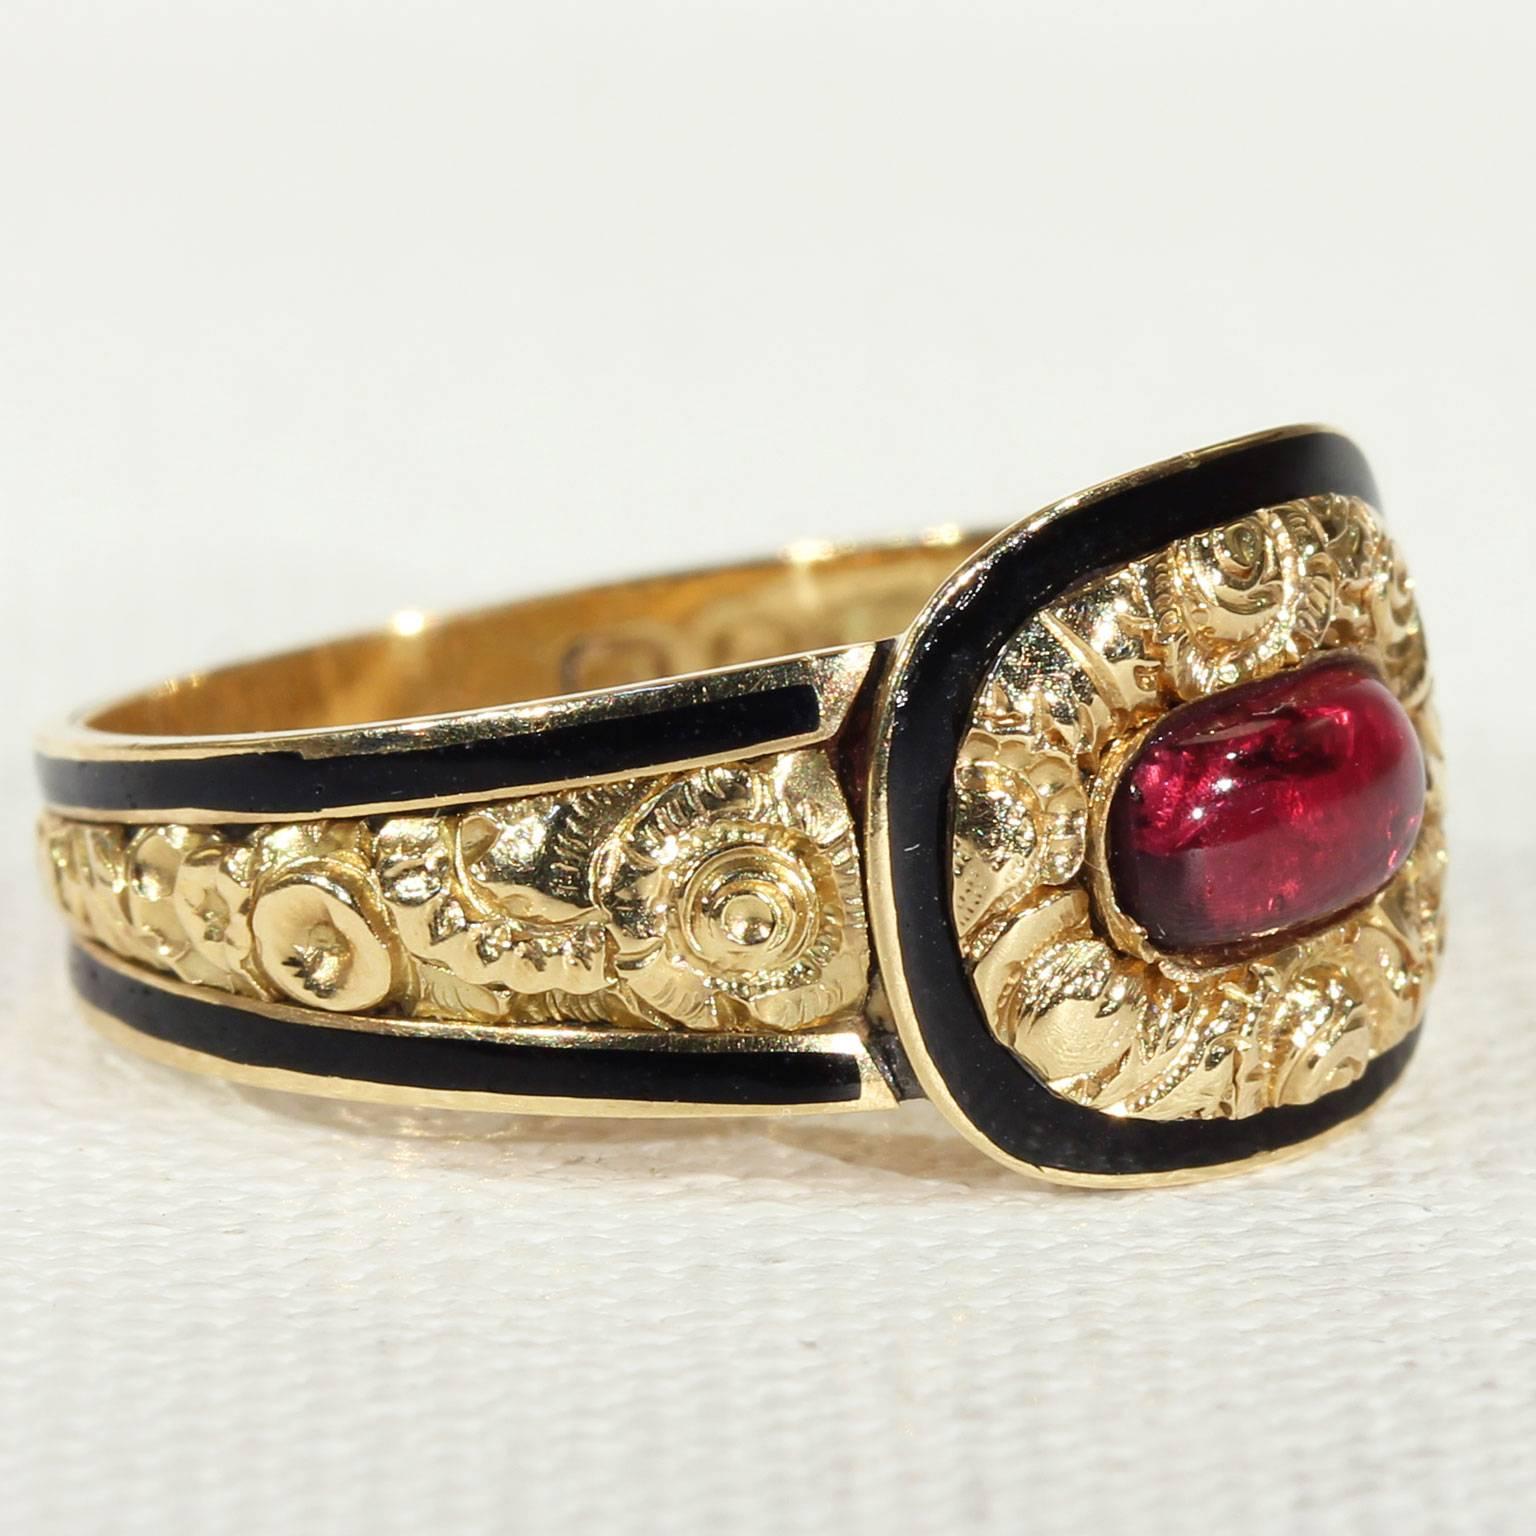 This beautiful antique Georgian memorial garnet and gold ring is fully hallmarked for having been hand crafted in 1821. It was made in 18 karat gold and features black enamel around the edges of the band and face. The entire outside of the ring is